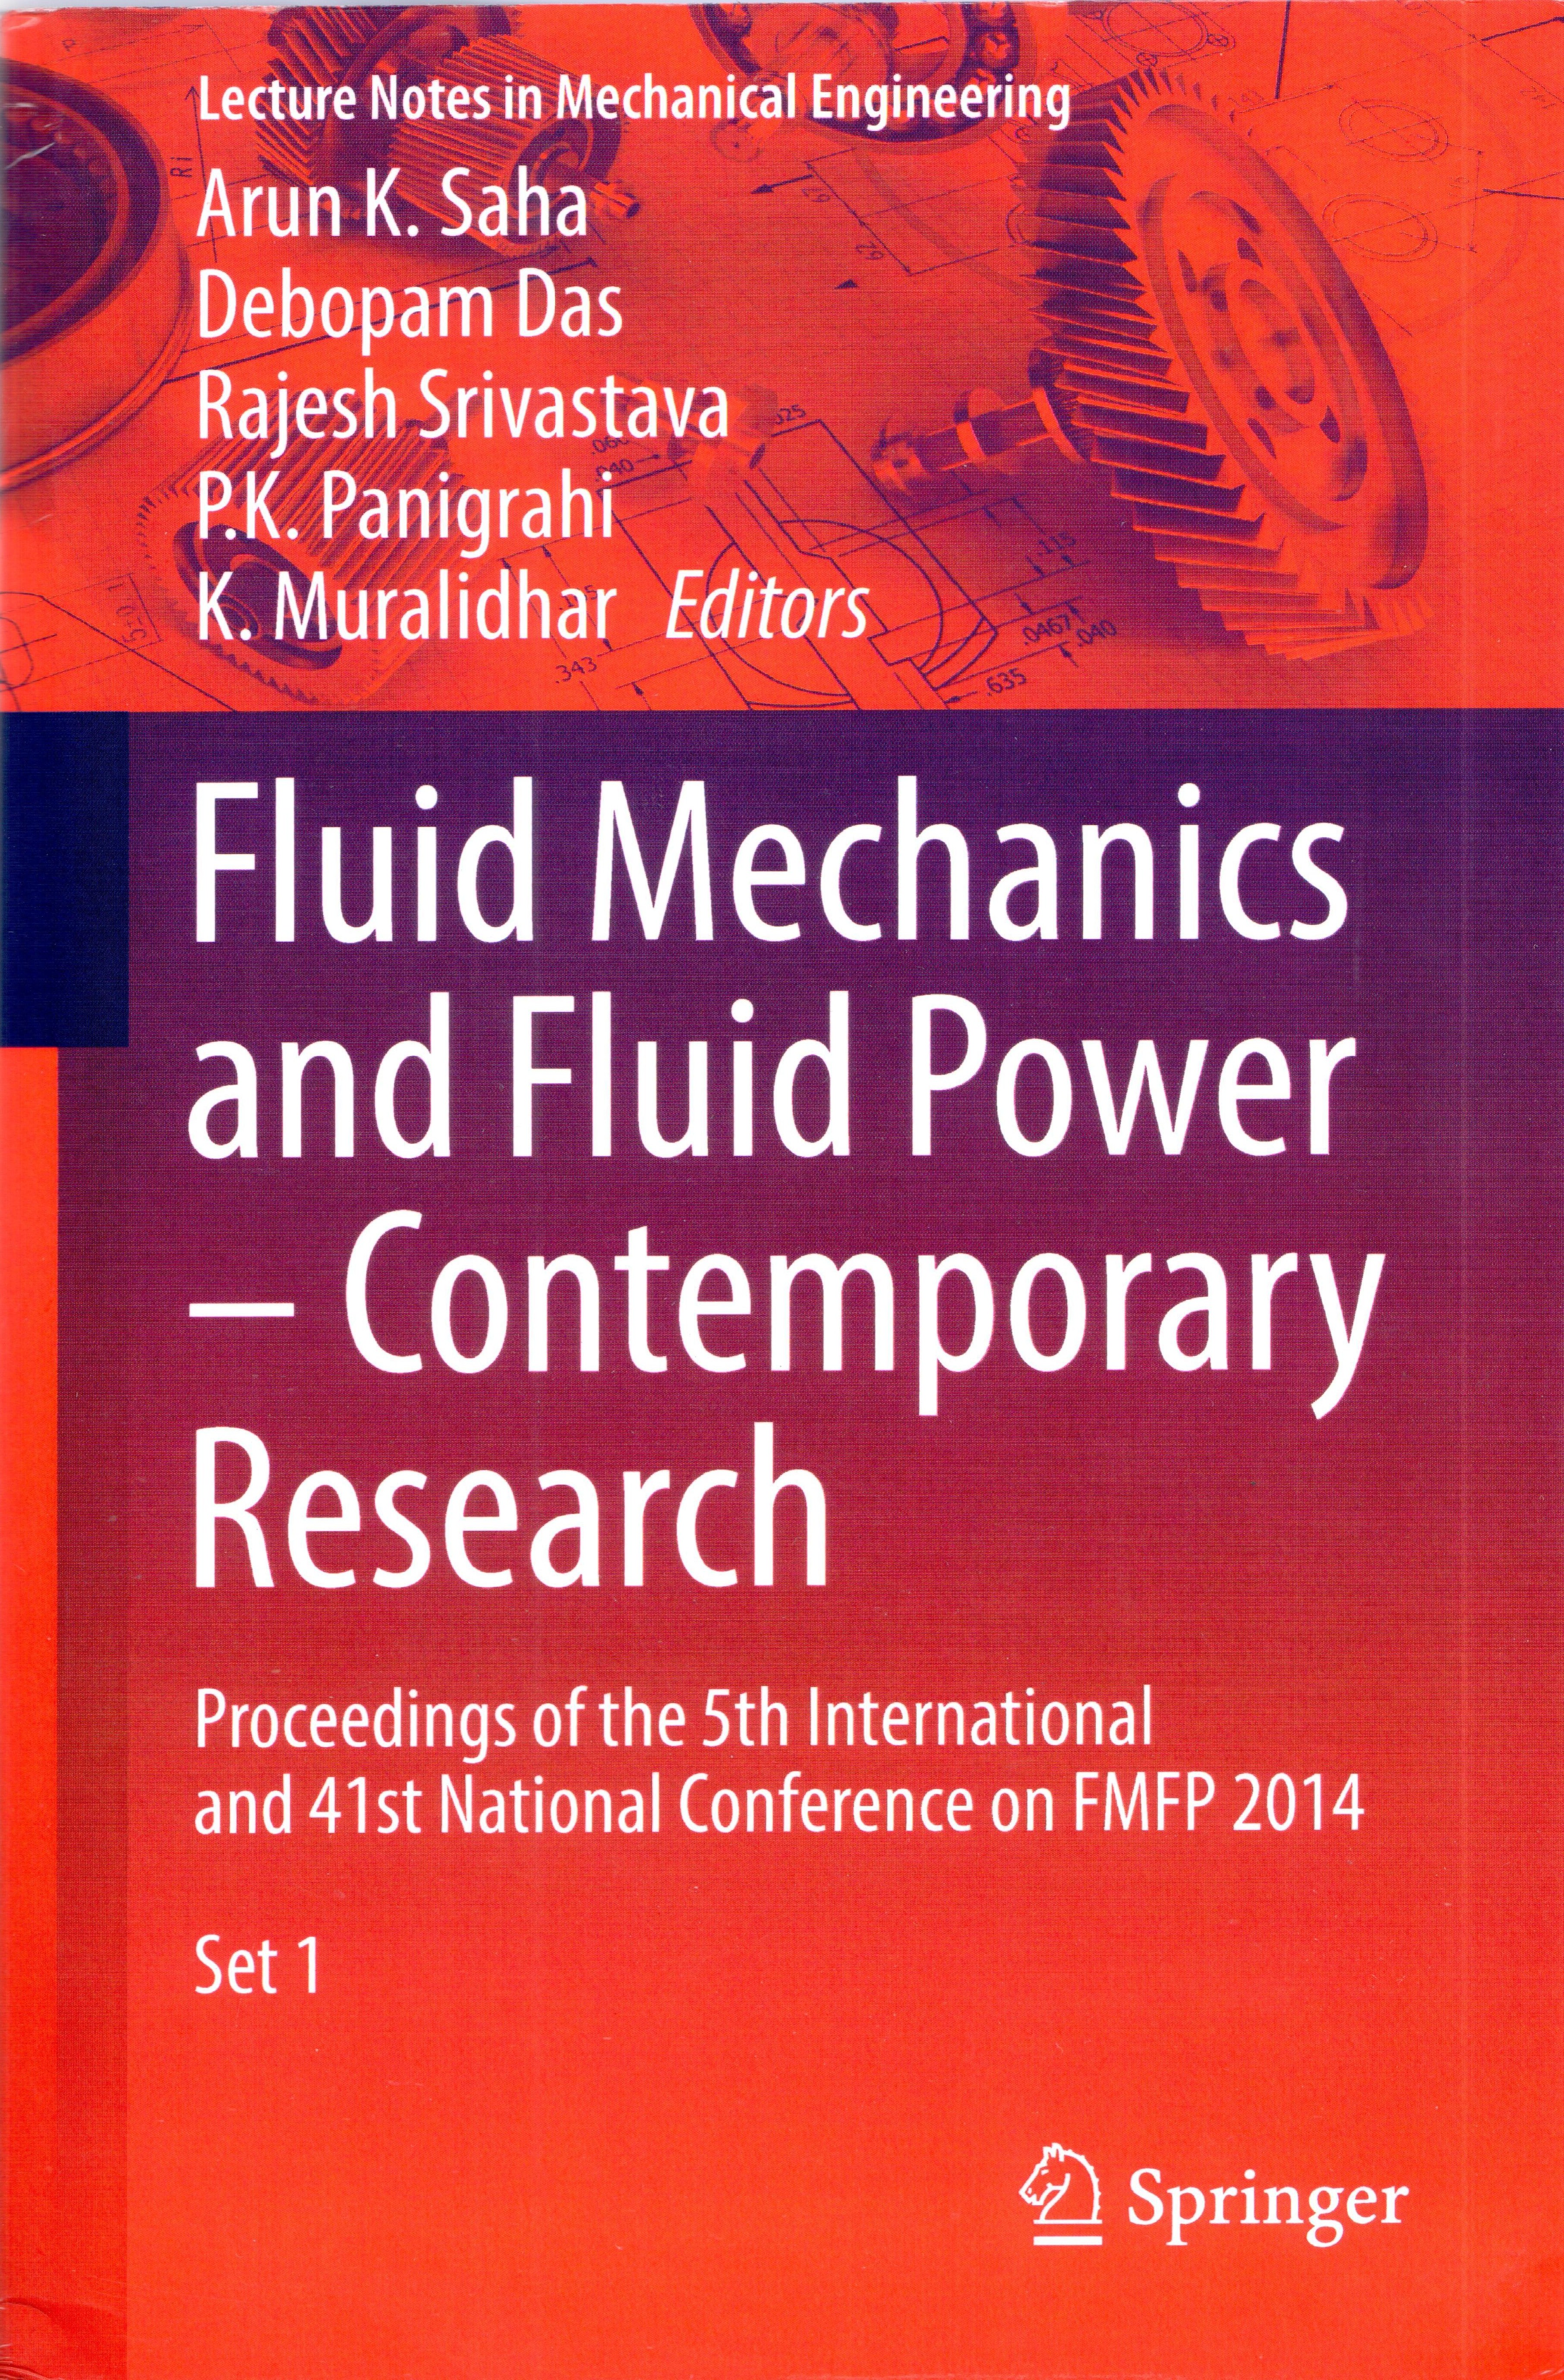 Proceedings of FMFP Conference 2014